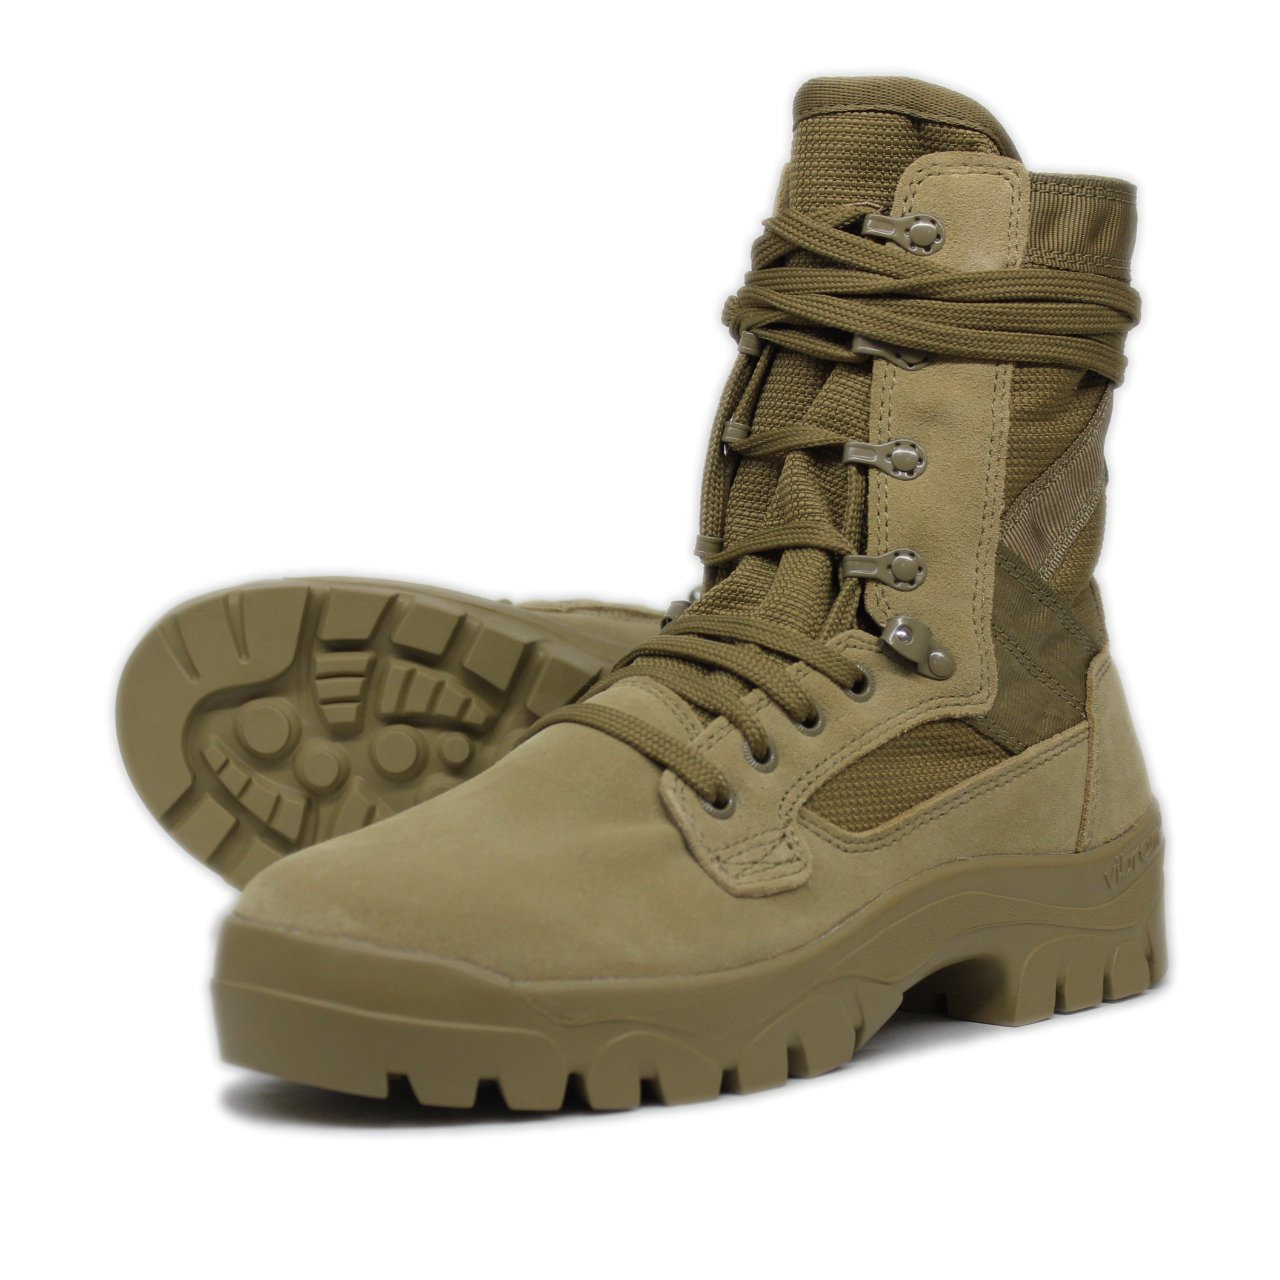 GARMONT T8 Bifiida Desert Boot - Wide Fit - Get the Ultimate Protection ...